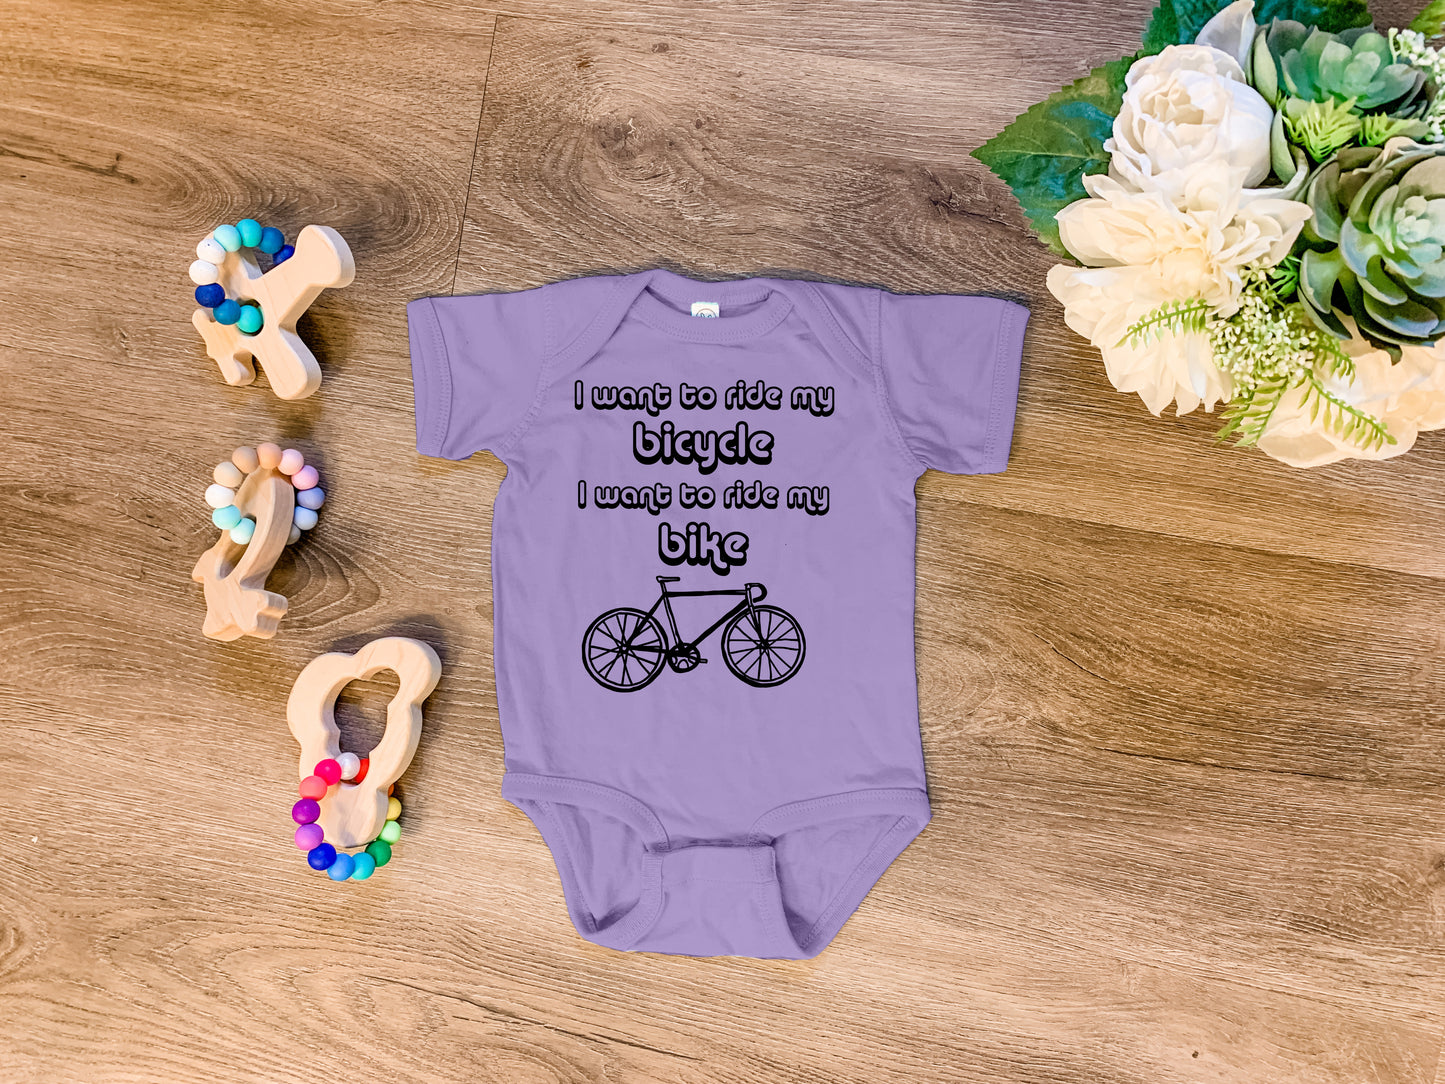 I Want To Ride My Bicycle, I Want To Ride My Bike - Onesie - Heather Gray, Chill, or Lavender